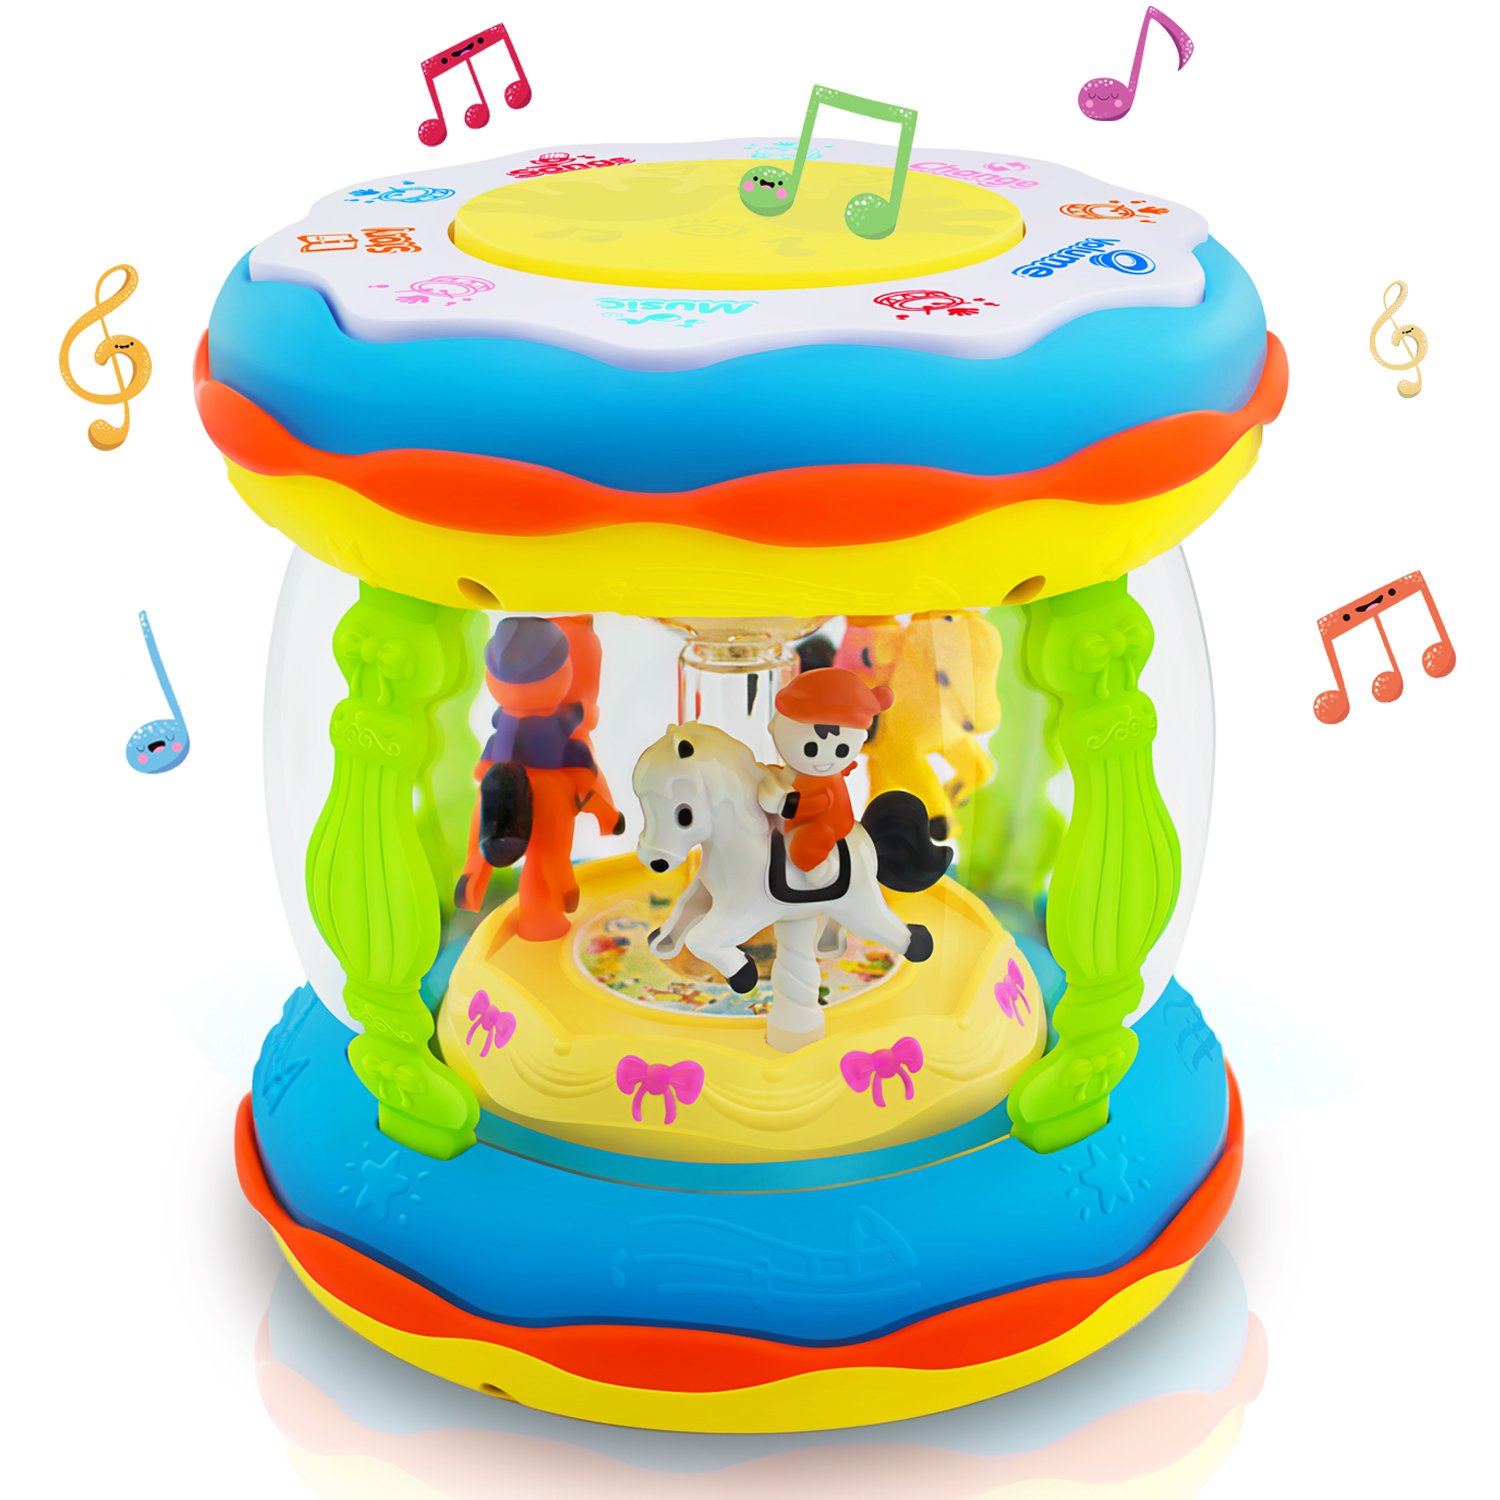 HXSNEW Toddler and Baby Musical Toys, Learning Toys for 1-3 Year Old Boys and Girls